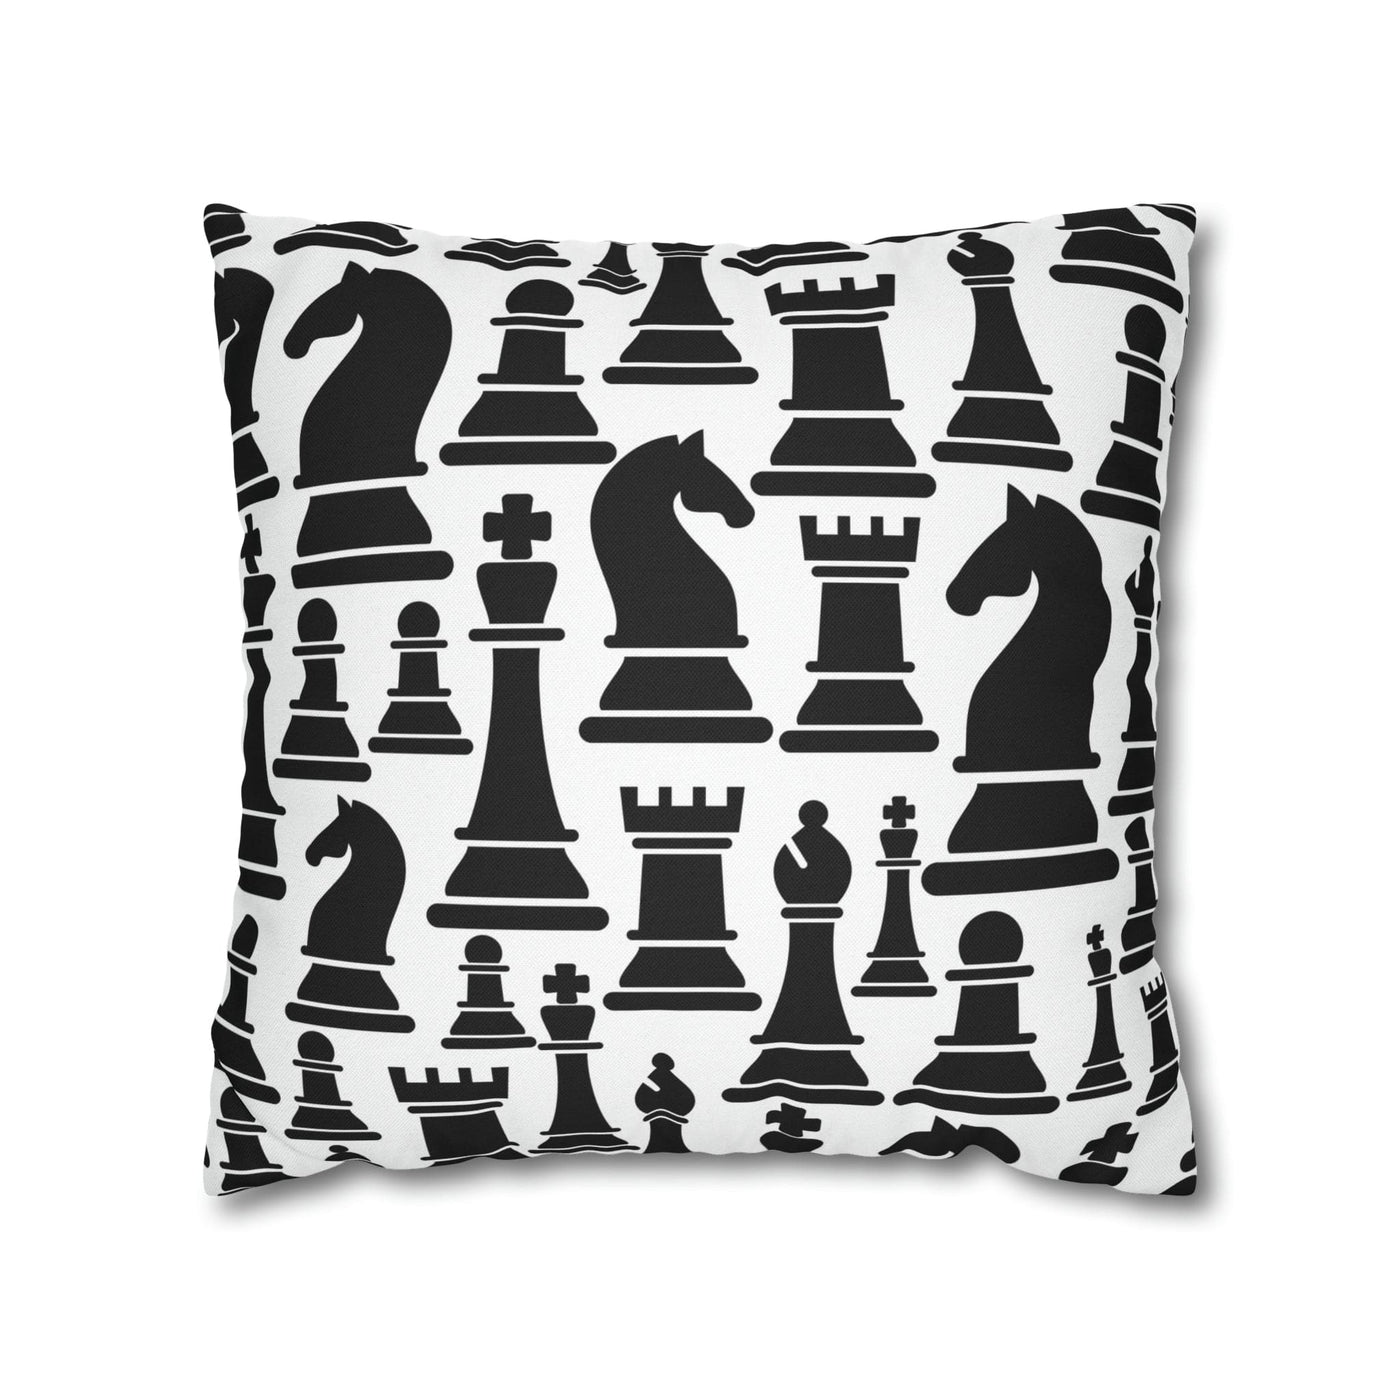 Decorative Throw Pillow Covers With Zipper - Set Of 2 Black And White Chess